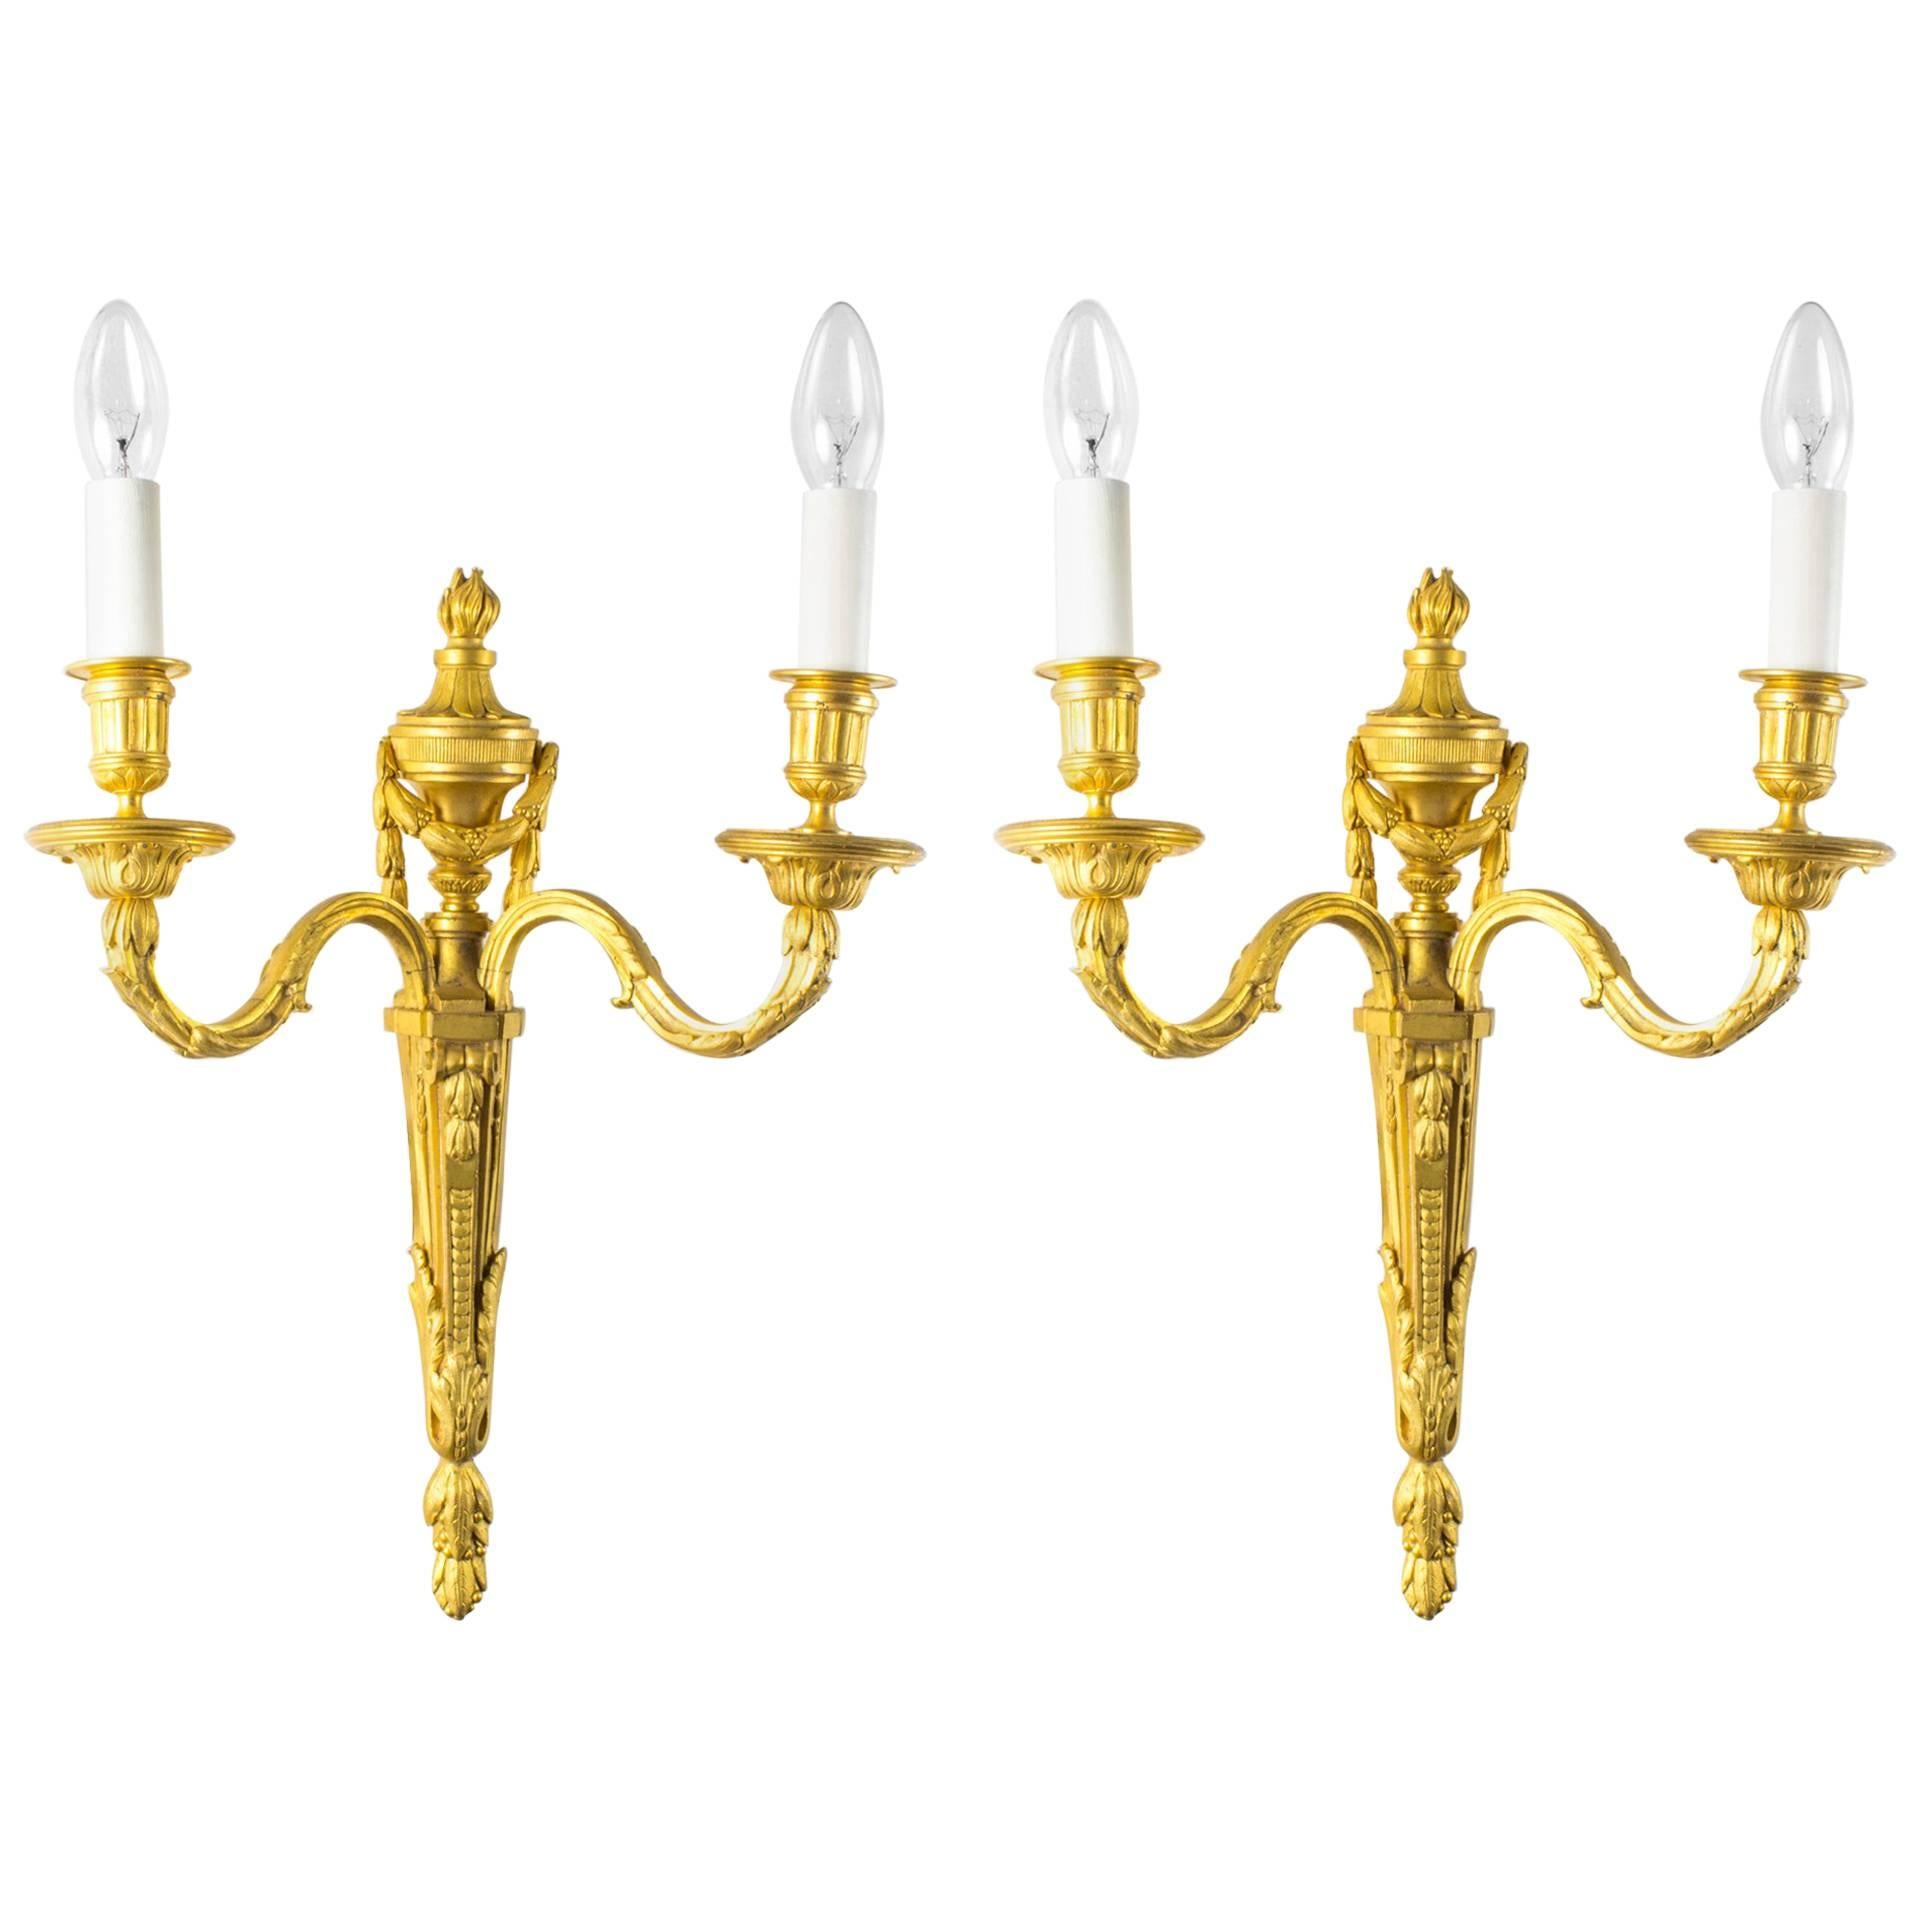 Antique Pair of Decorative Twin Branch Wall Lights, 19th Century